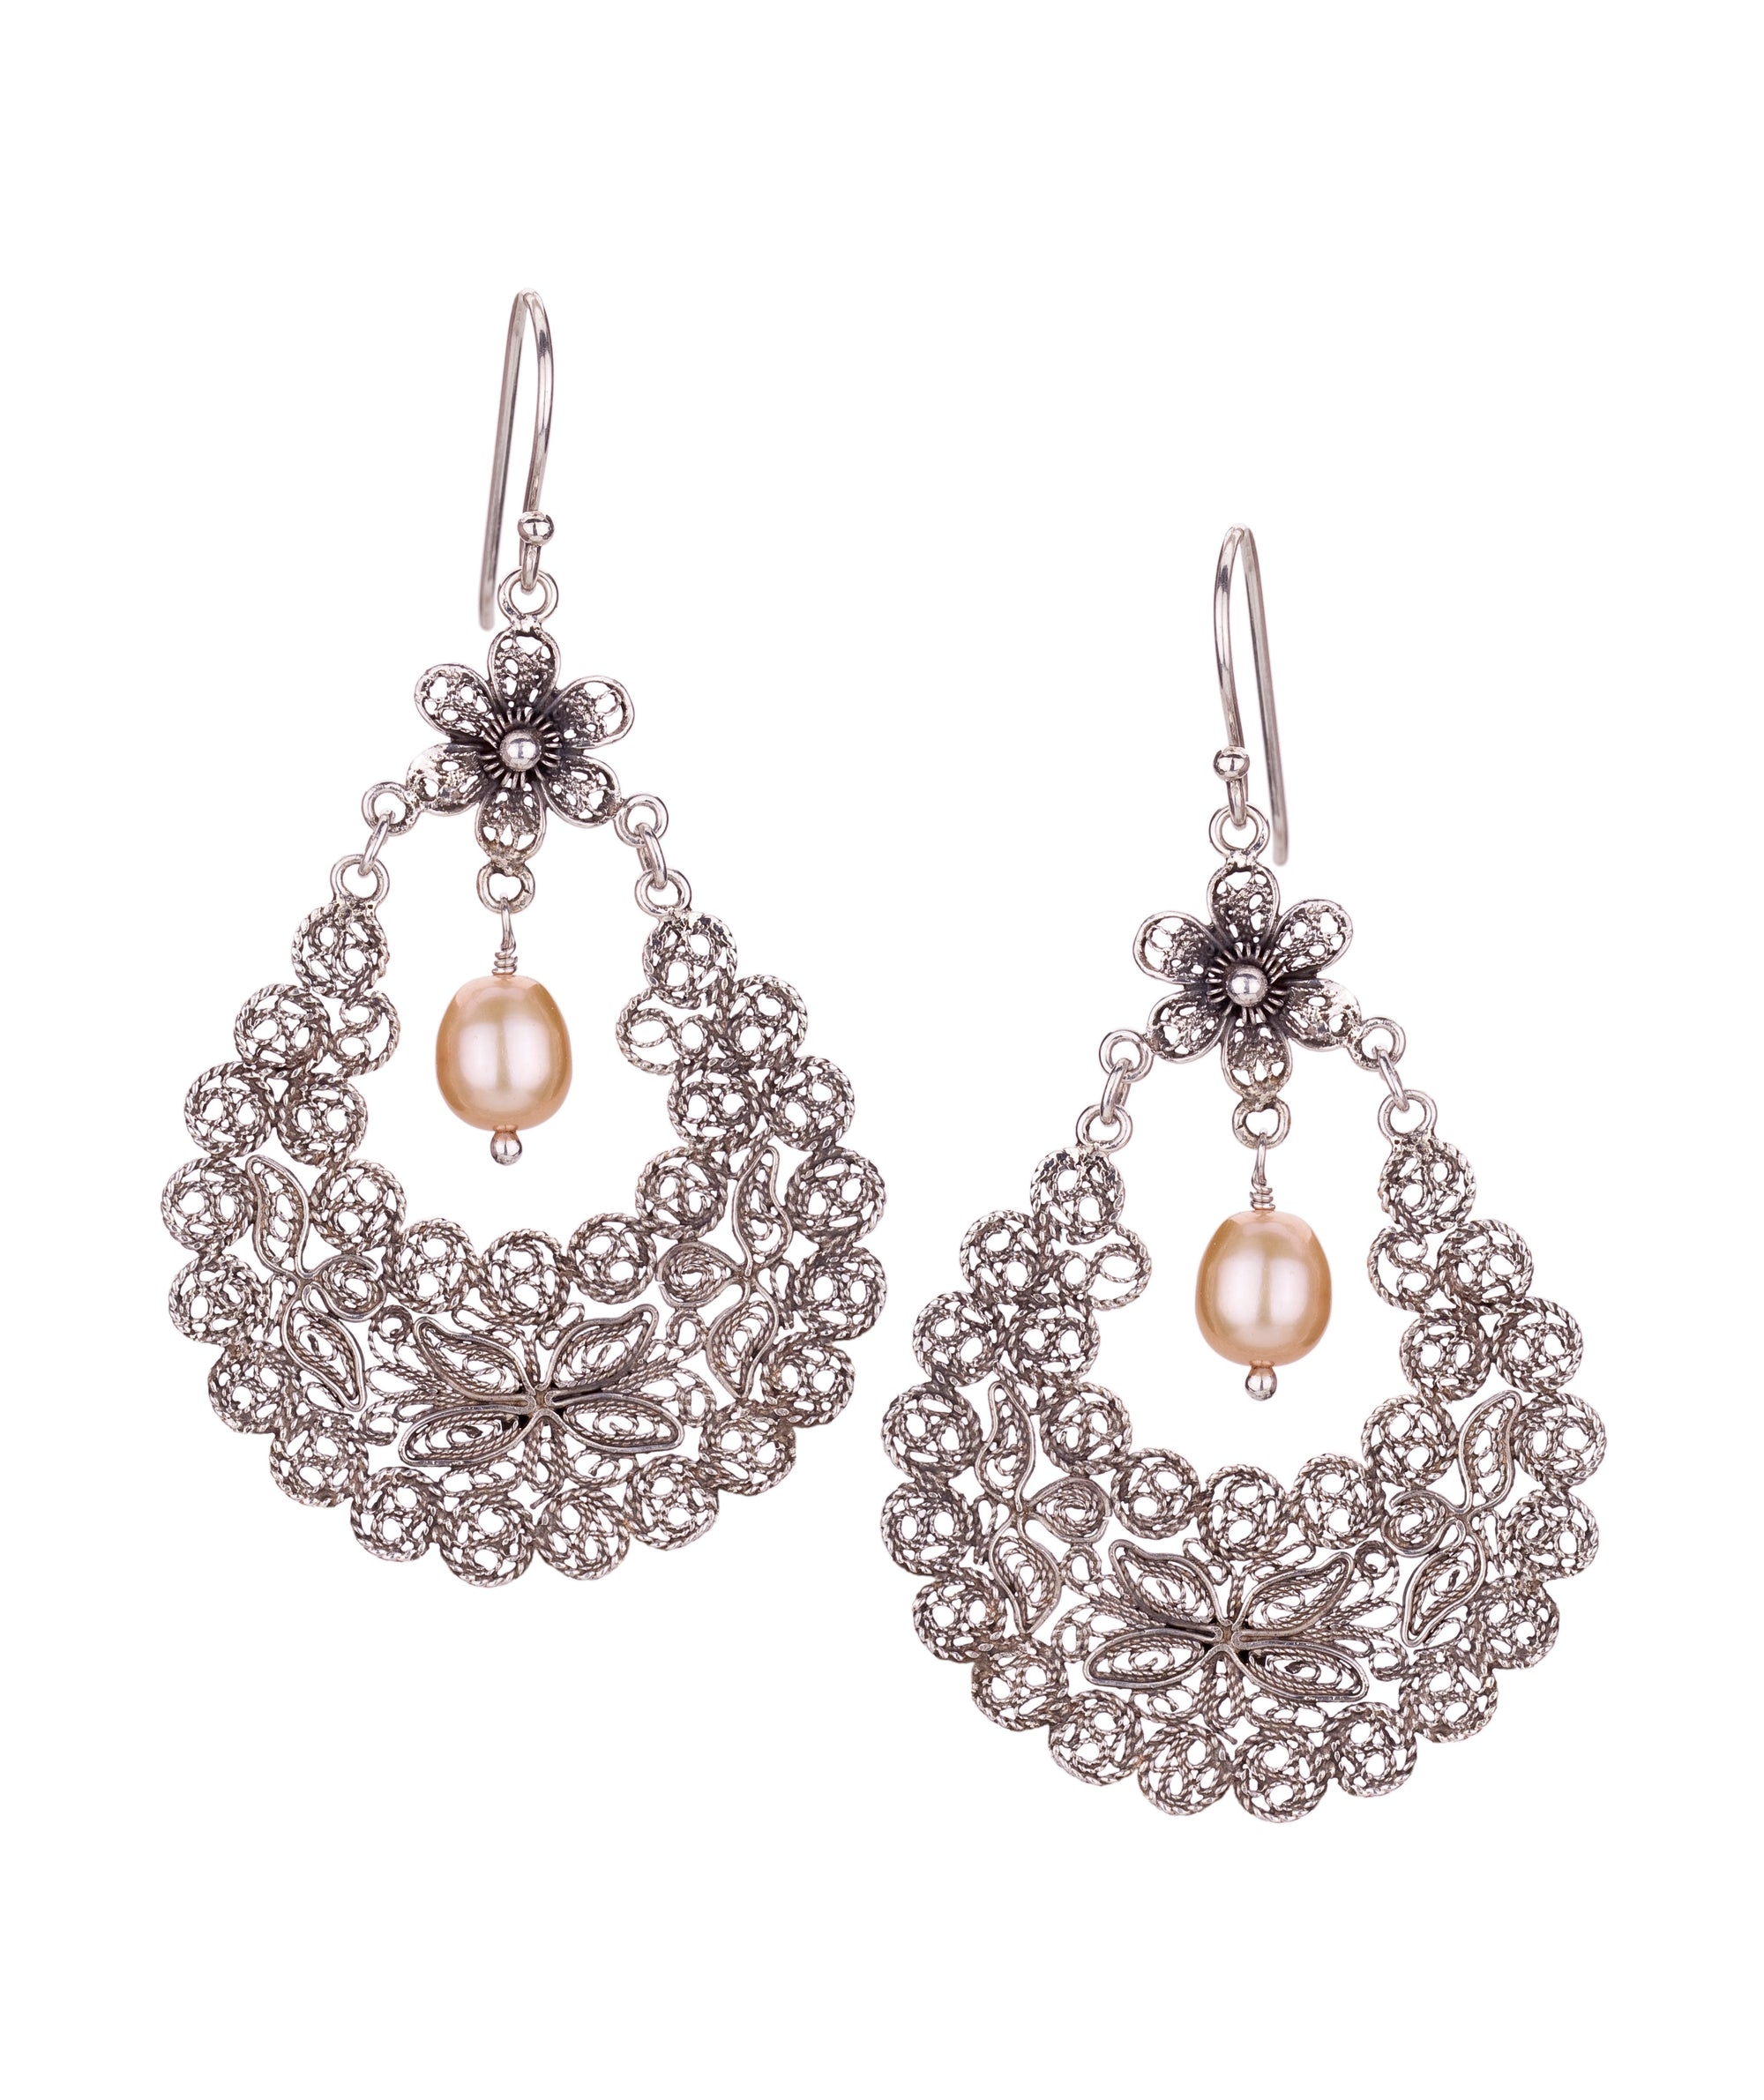 Nature's Lace Earrings - Cream Pearls